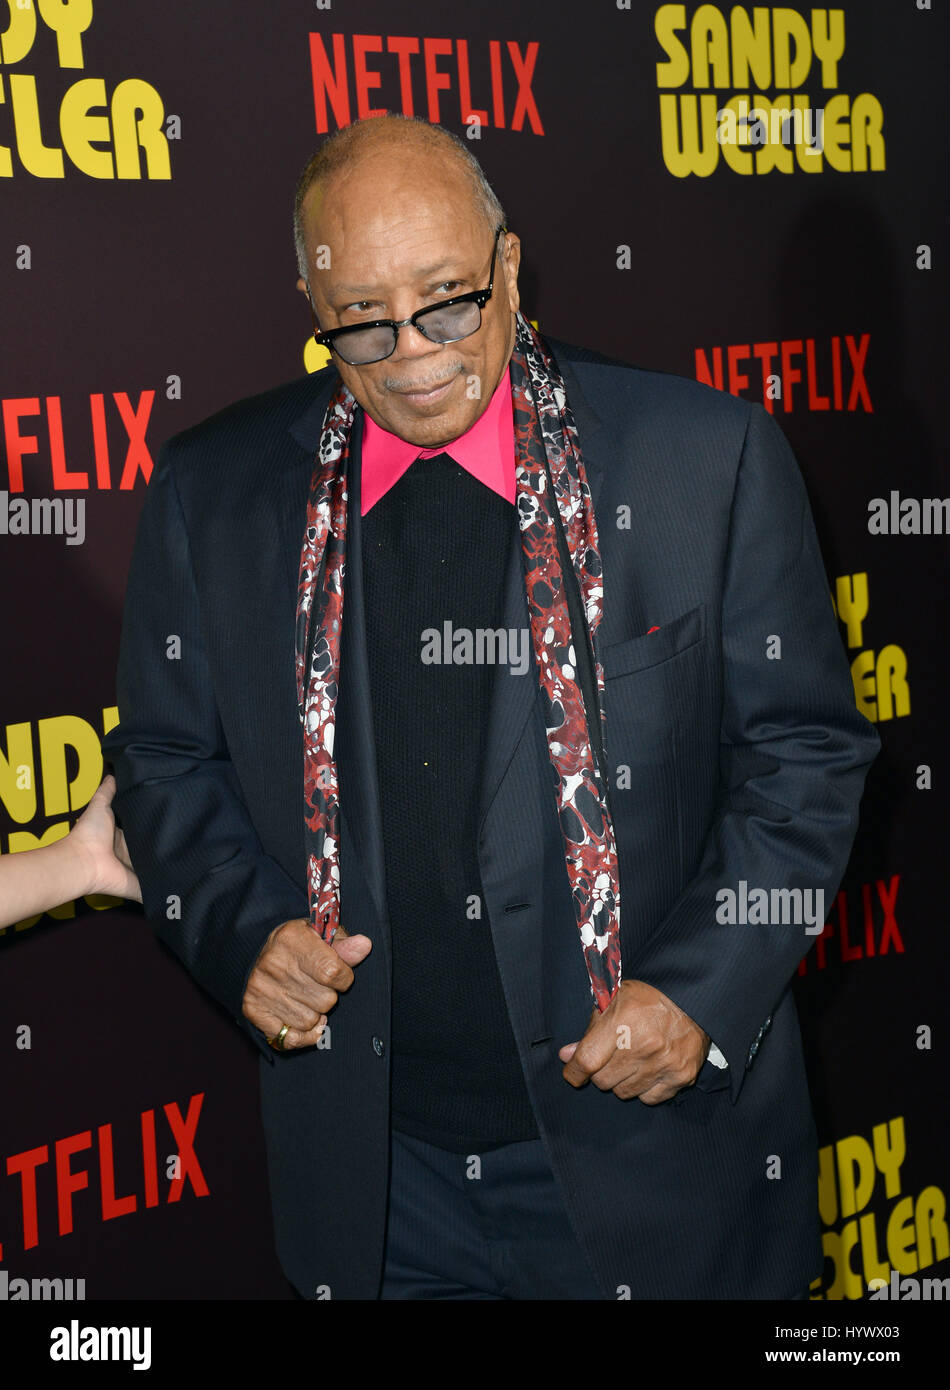 Los Angeles, USA. 06th Apr, 2017. Musician Quincy Jones at the premiere for 'Sandy Wexler' at The Cinerama Dome, Hollywood. Picture Credit: Sarah Stewart/Alamy Live News Stock Photo